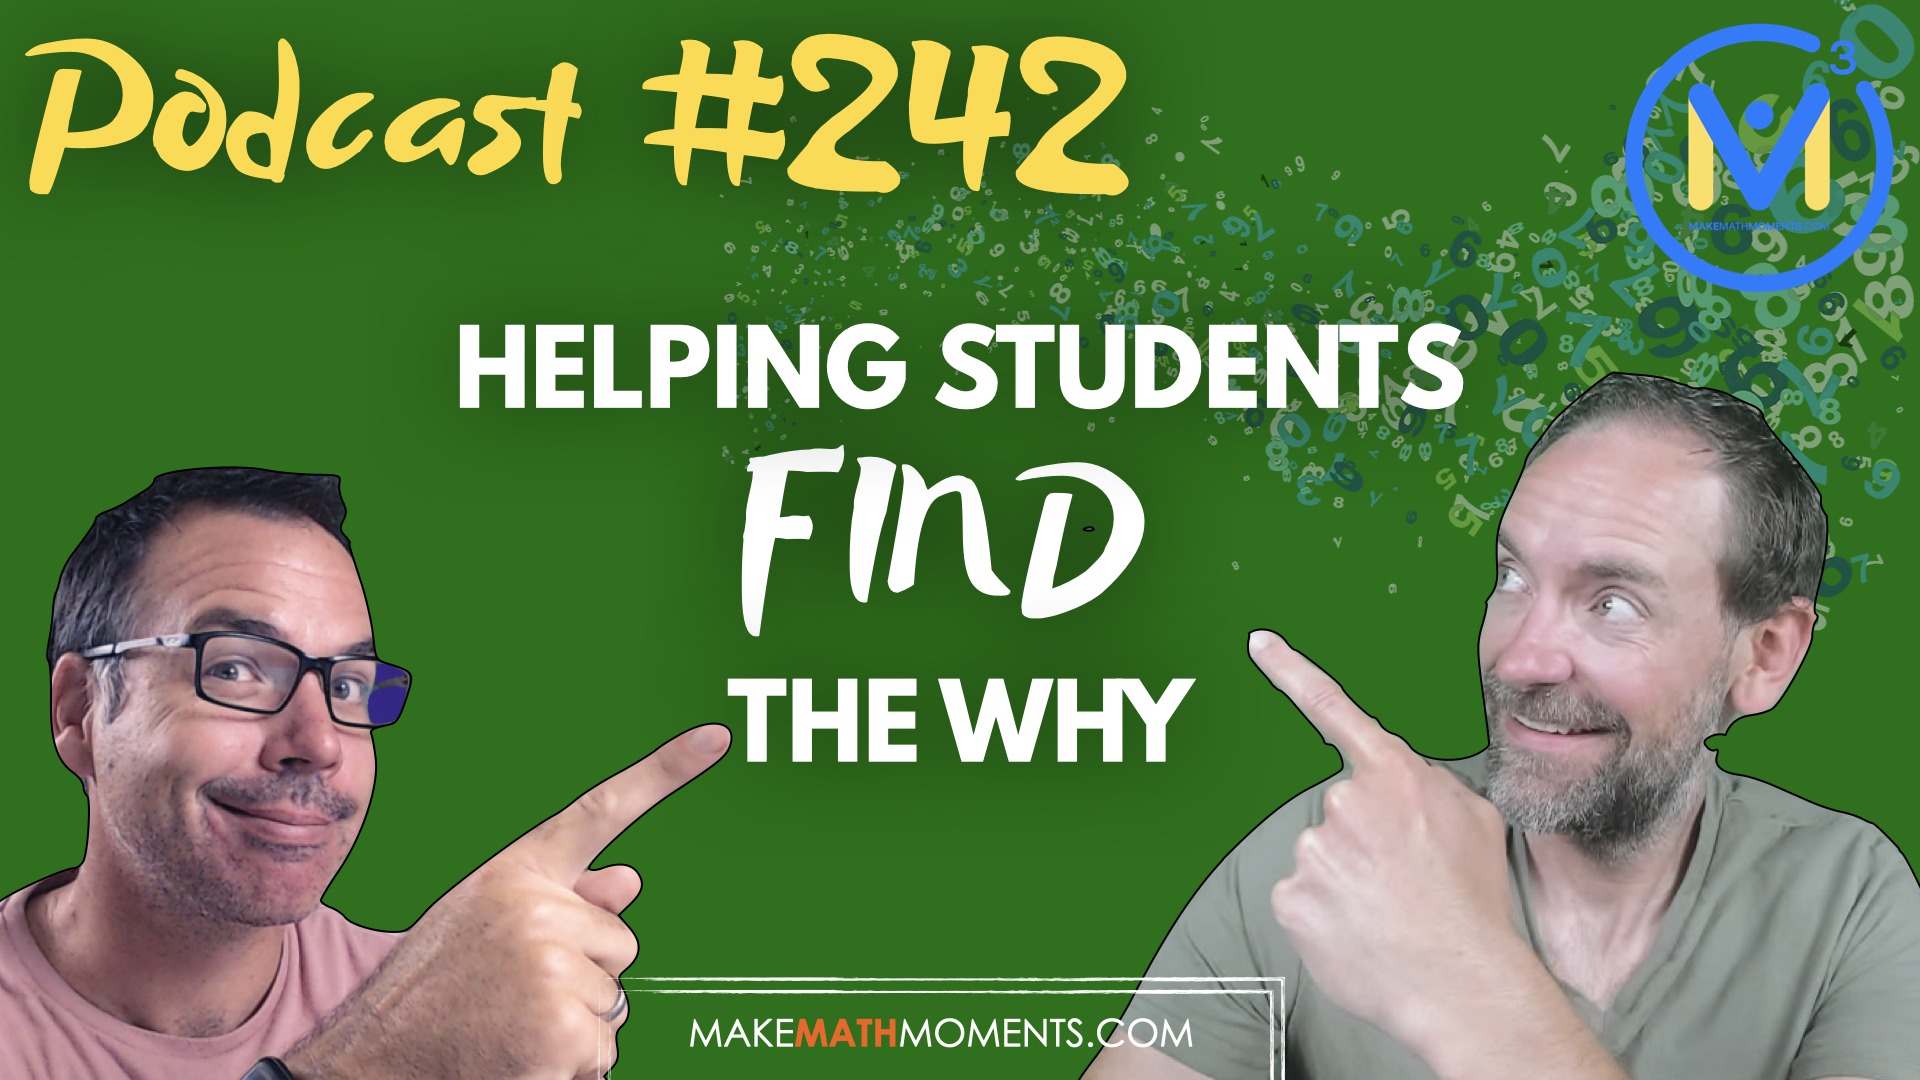 Episode 242: Helping Students Find the Why – A Math Mentoring Moment